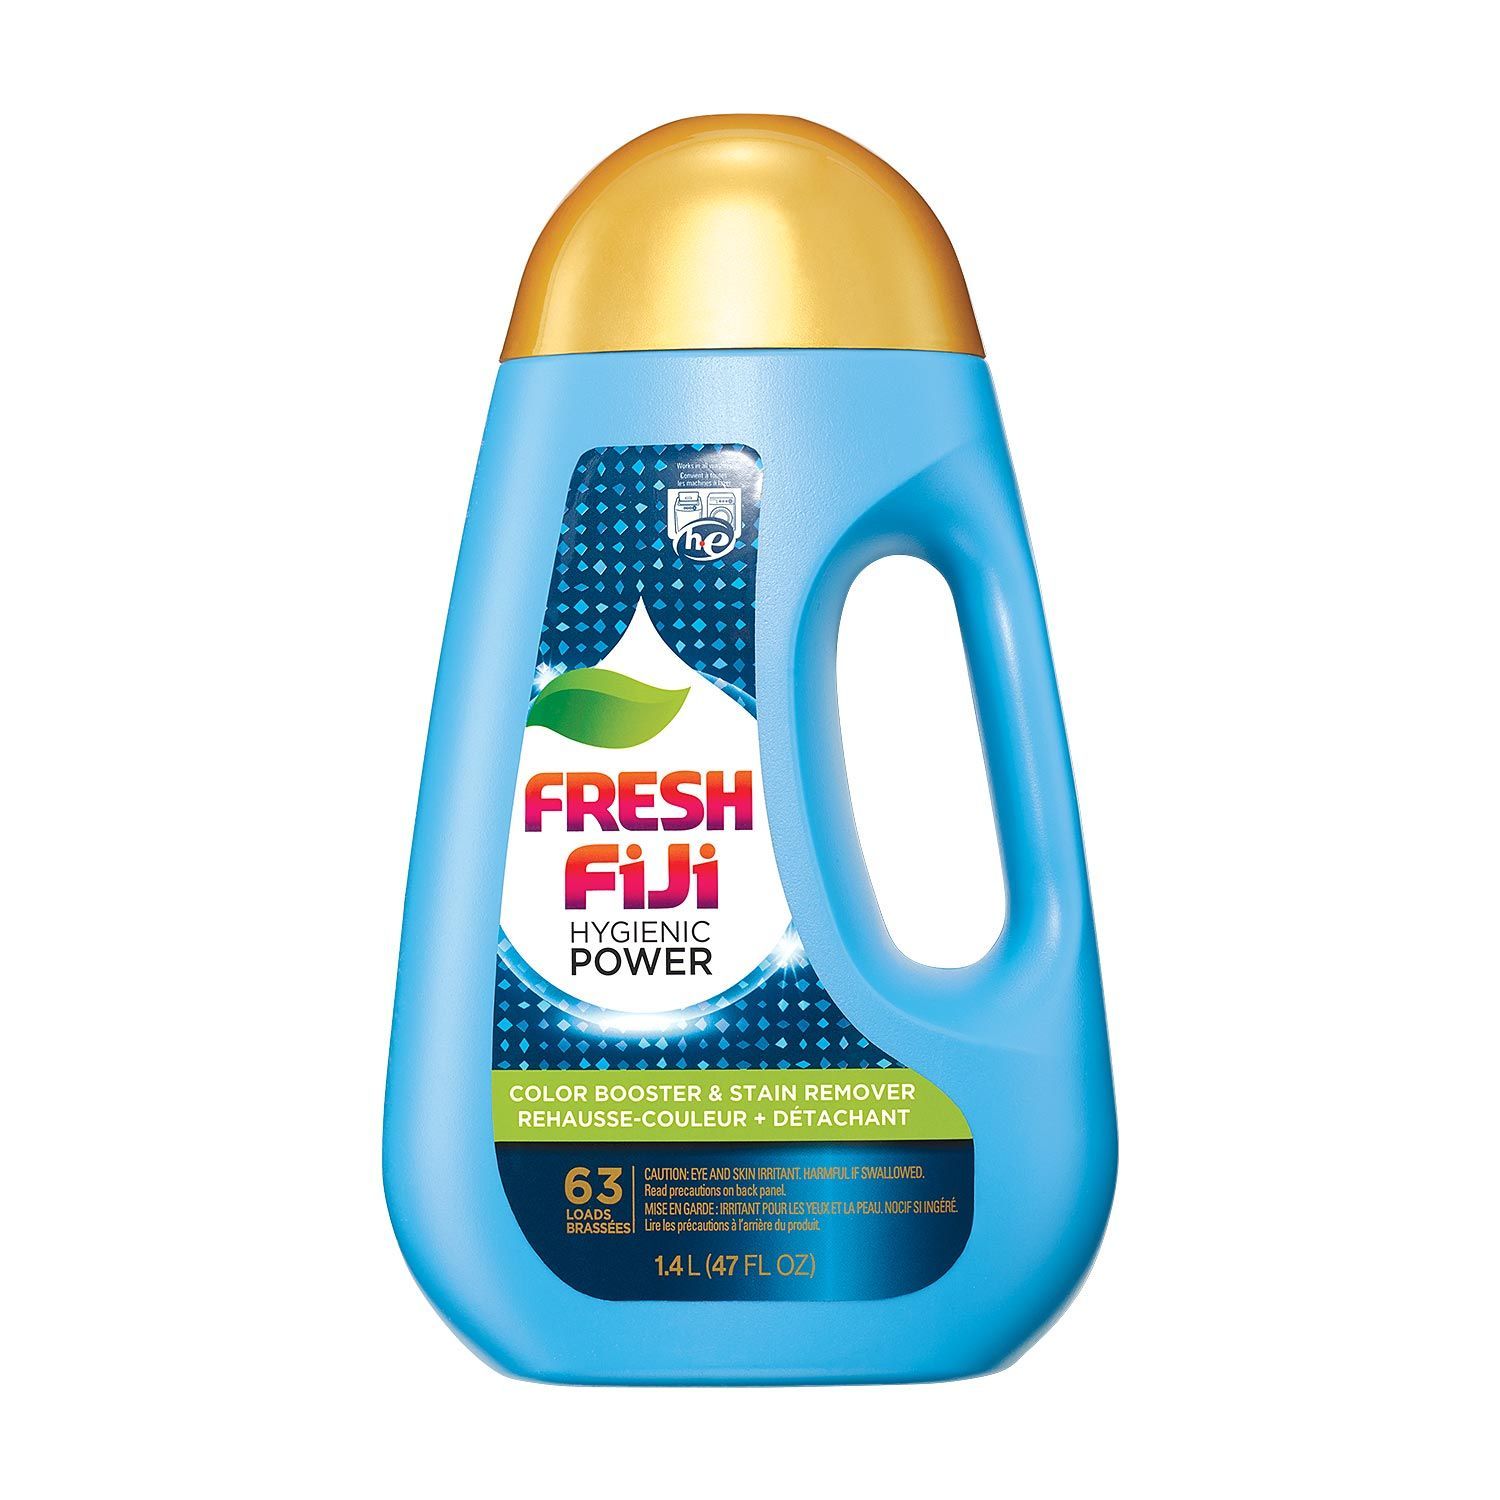 Fresh Fiji Hygienic Power Color Booster & Stain Remover - Avon